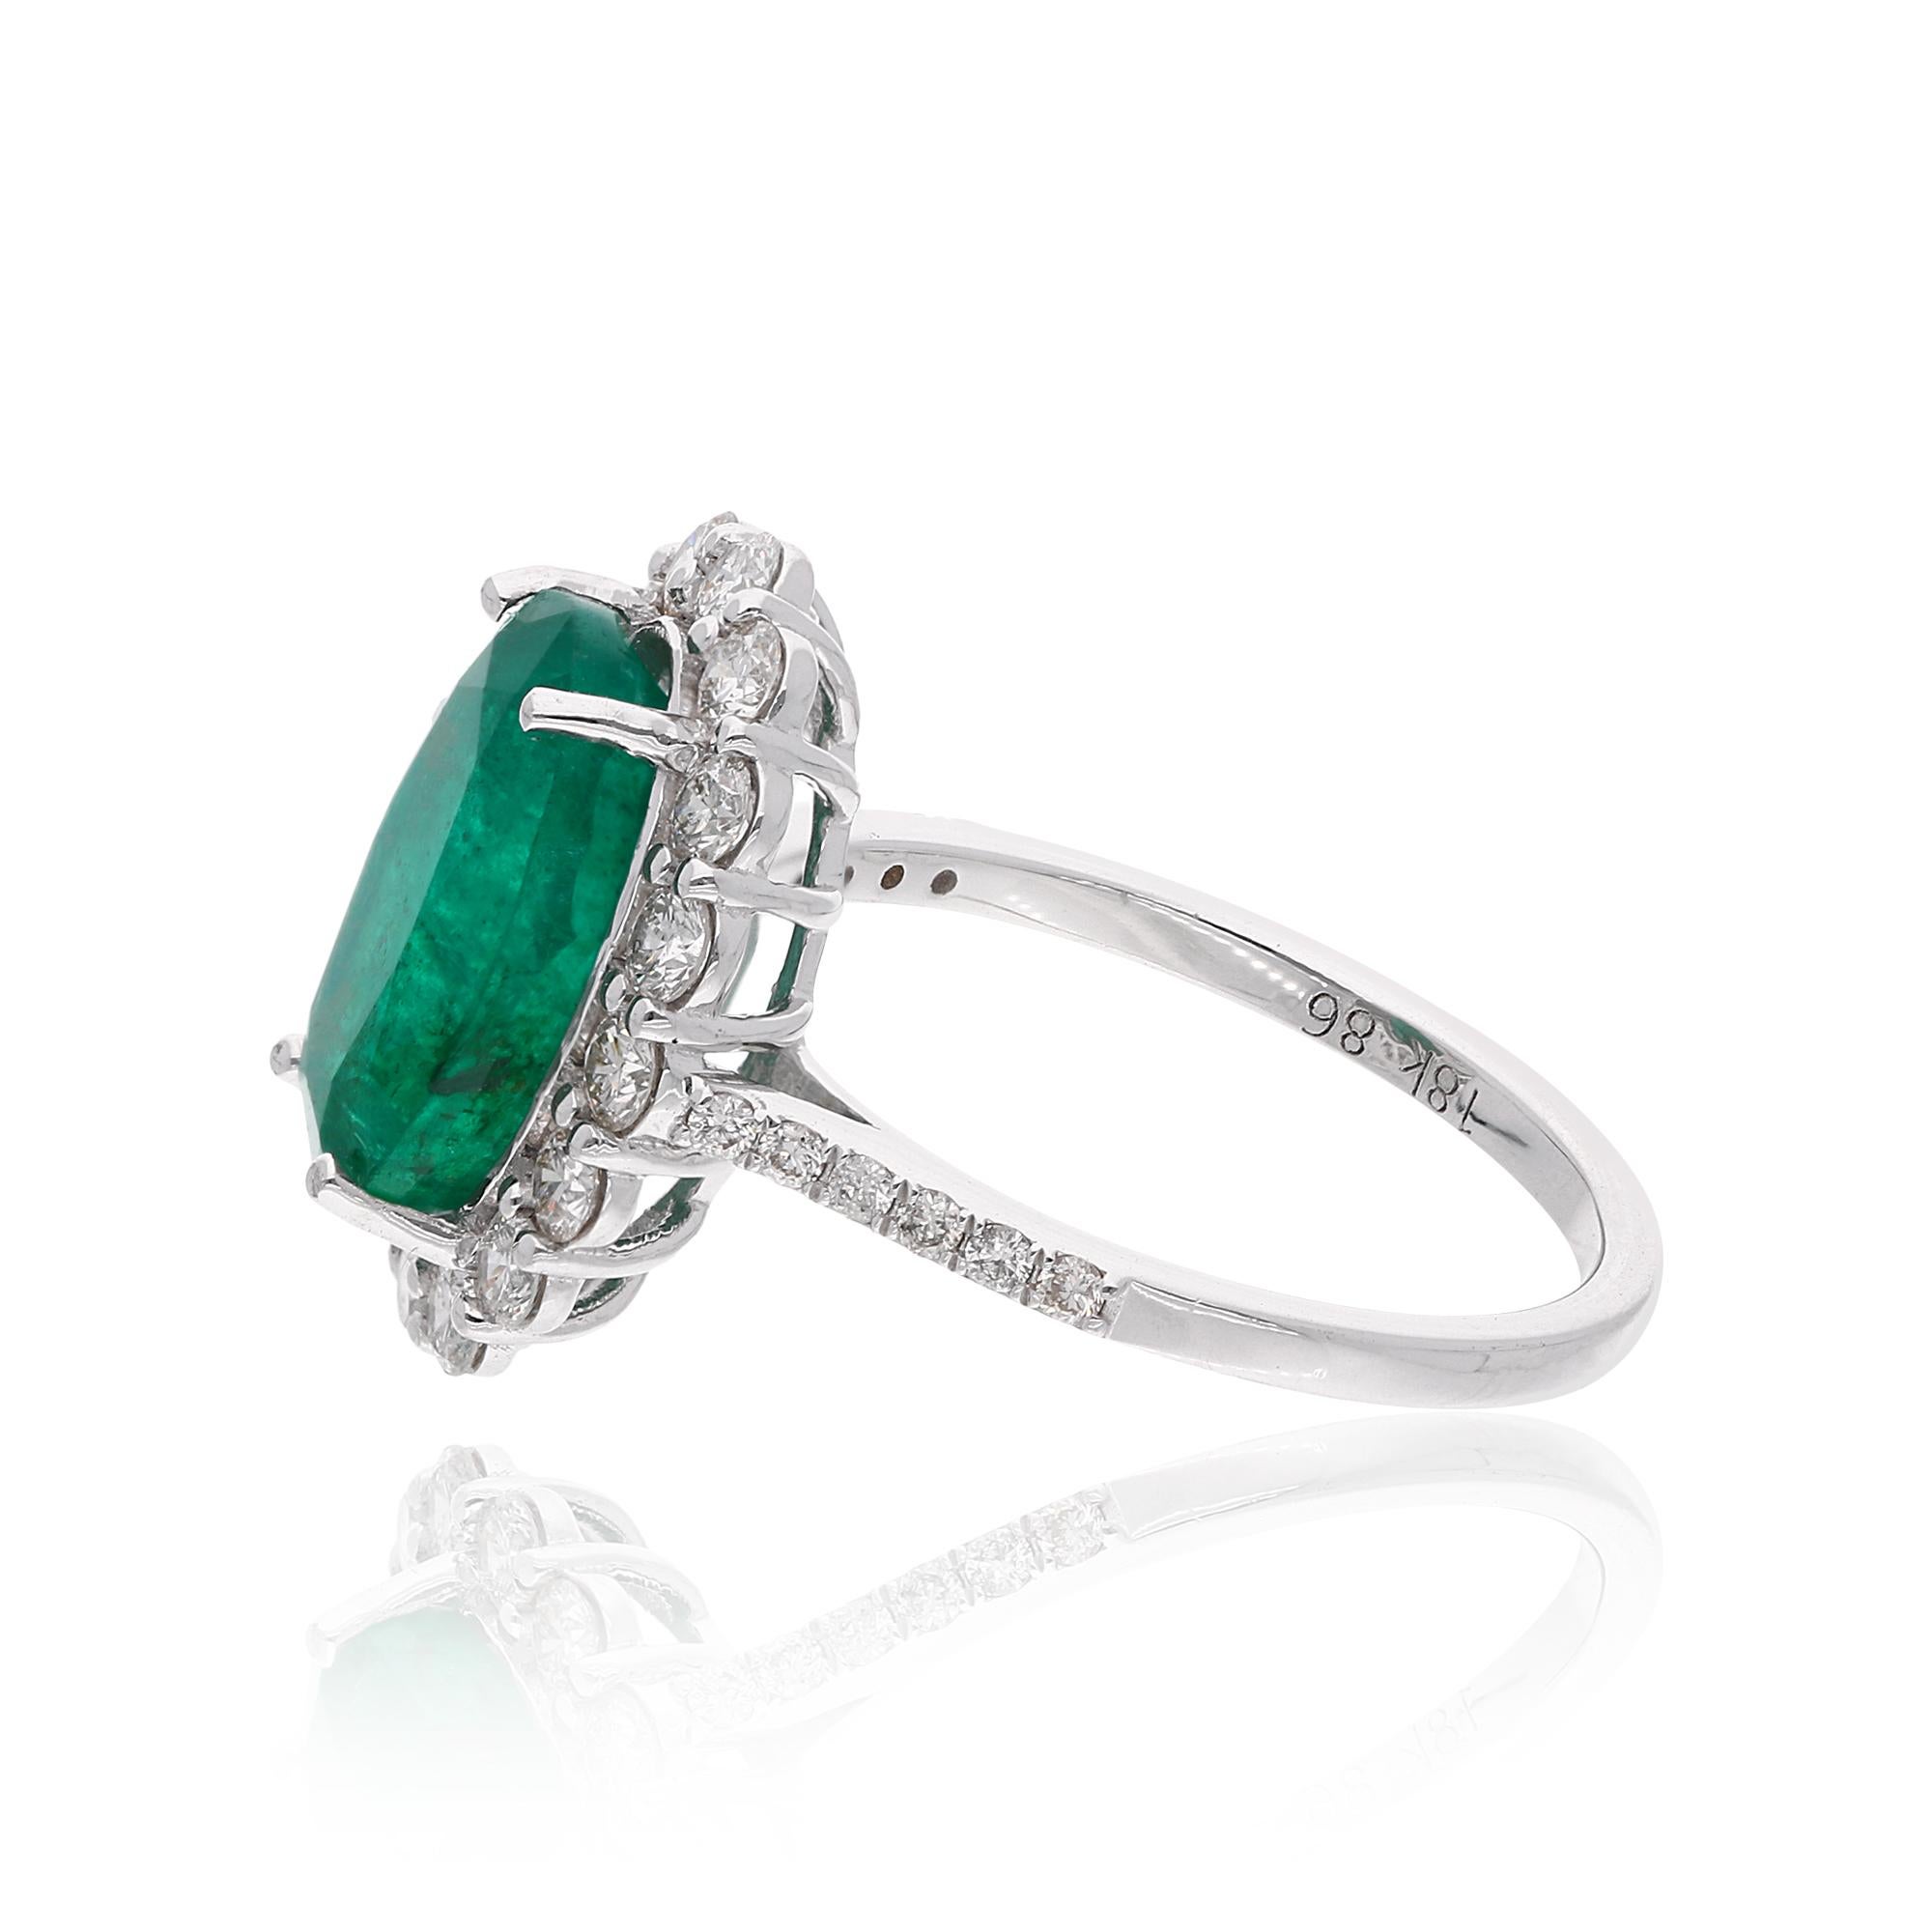 Item Code :- SER-22328
Gross Wt. :- 4.42 gm
18k White Gold Wt. :- 3.26 gm
Diamond Wt. :- 0.84 Ct. ( AVERAGE DIAMOND CLARITY SI1-SI2 & COLOR H-I )
Zambian Emerald Wt. :- 4.95 Ct.
Ring Size :- 7 US & All size available

✦